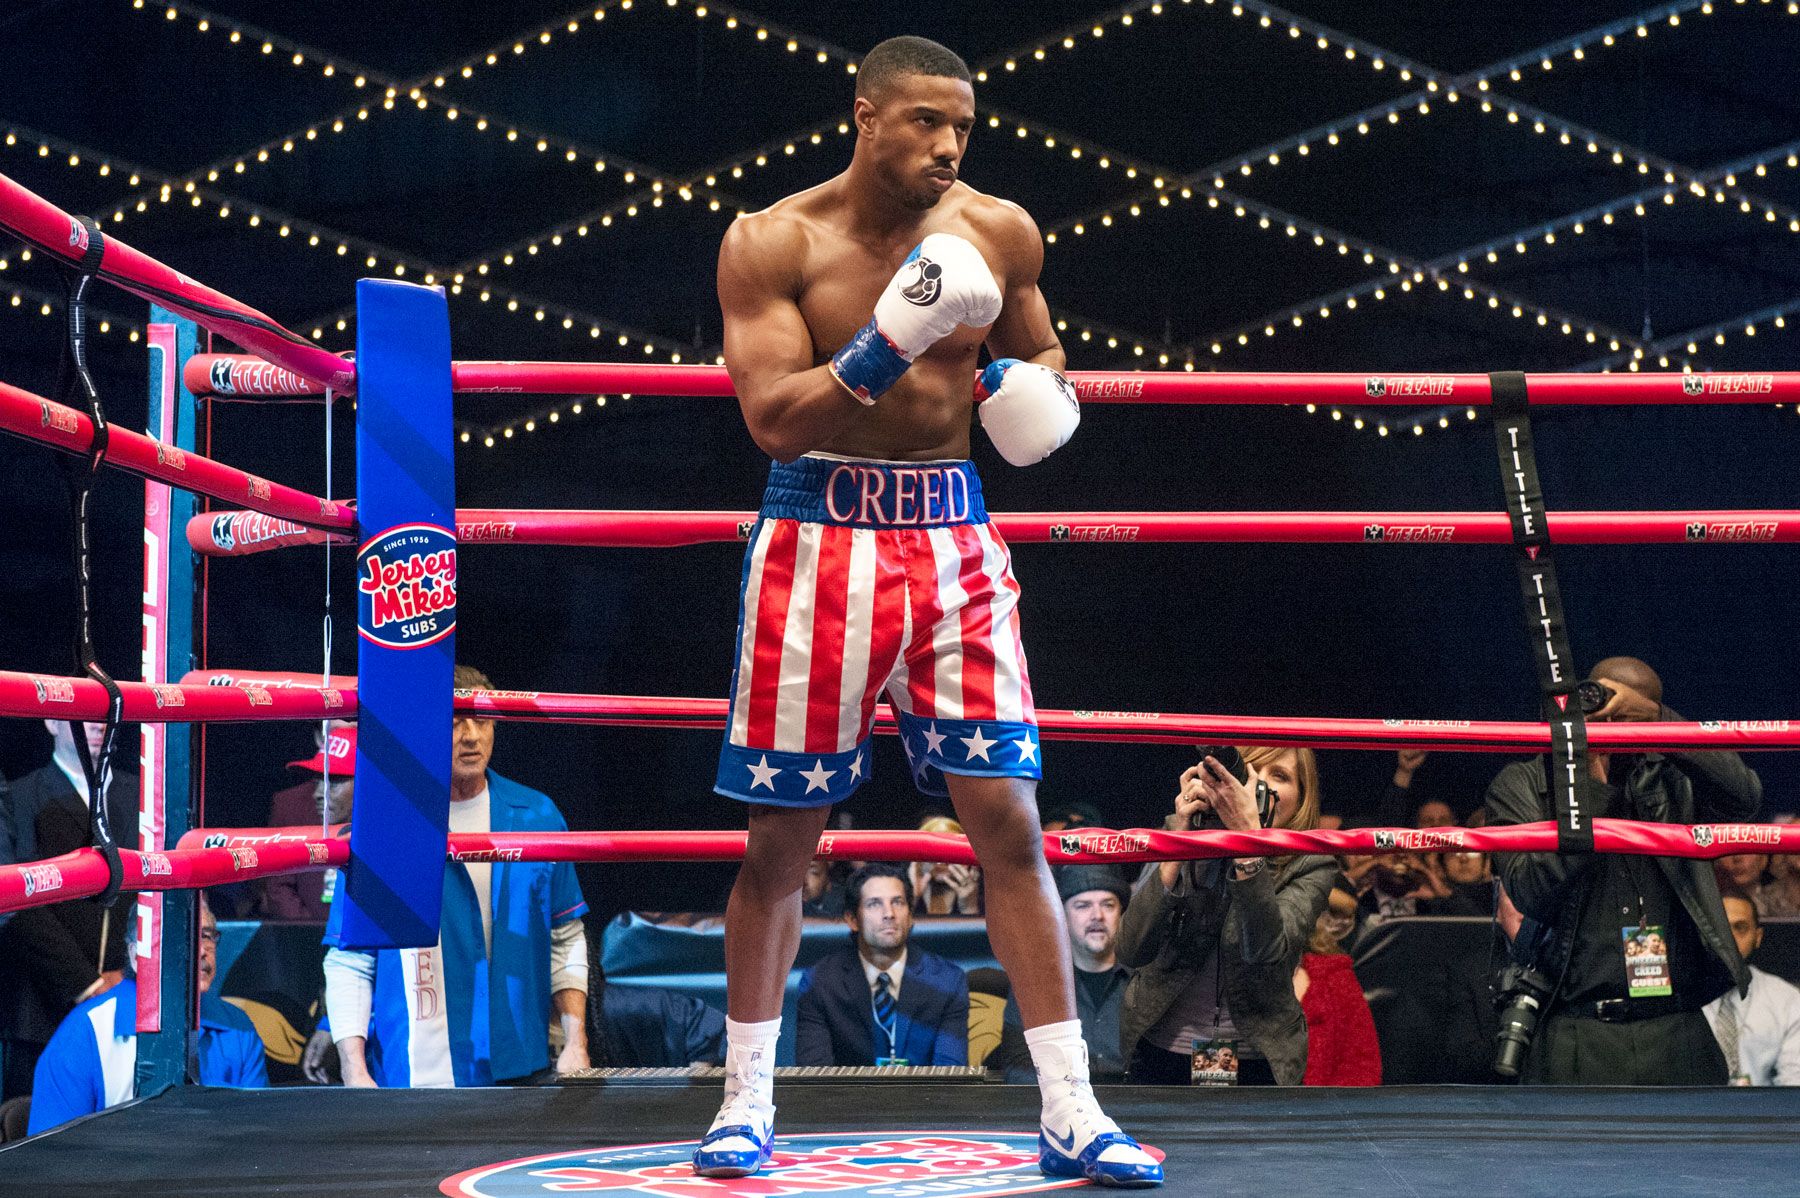 Michael Creed II Workout Plan - How To Look Like